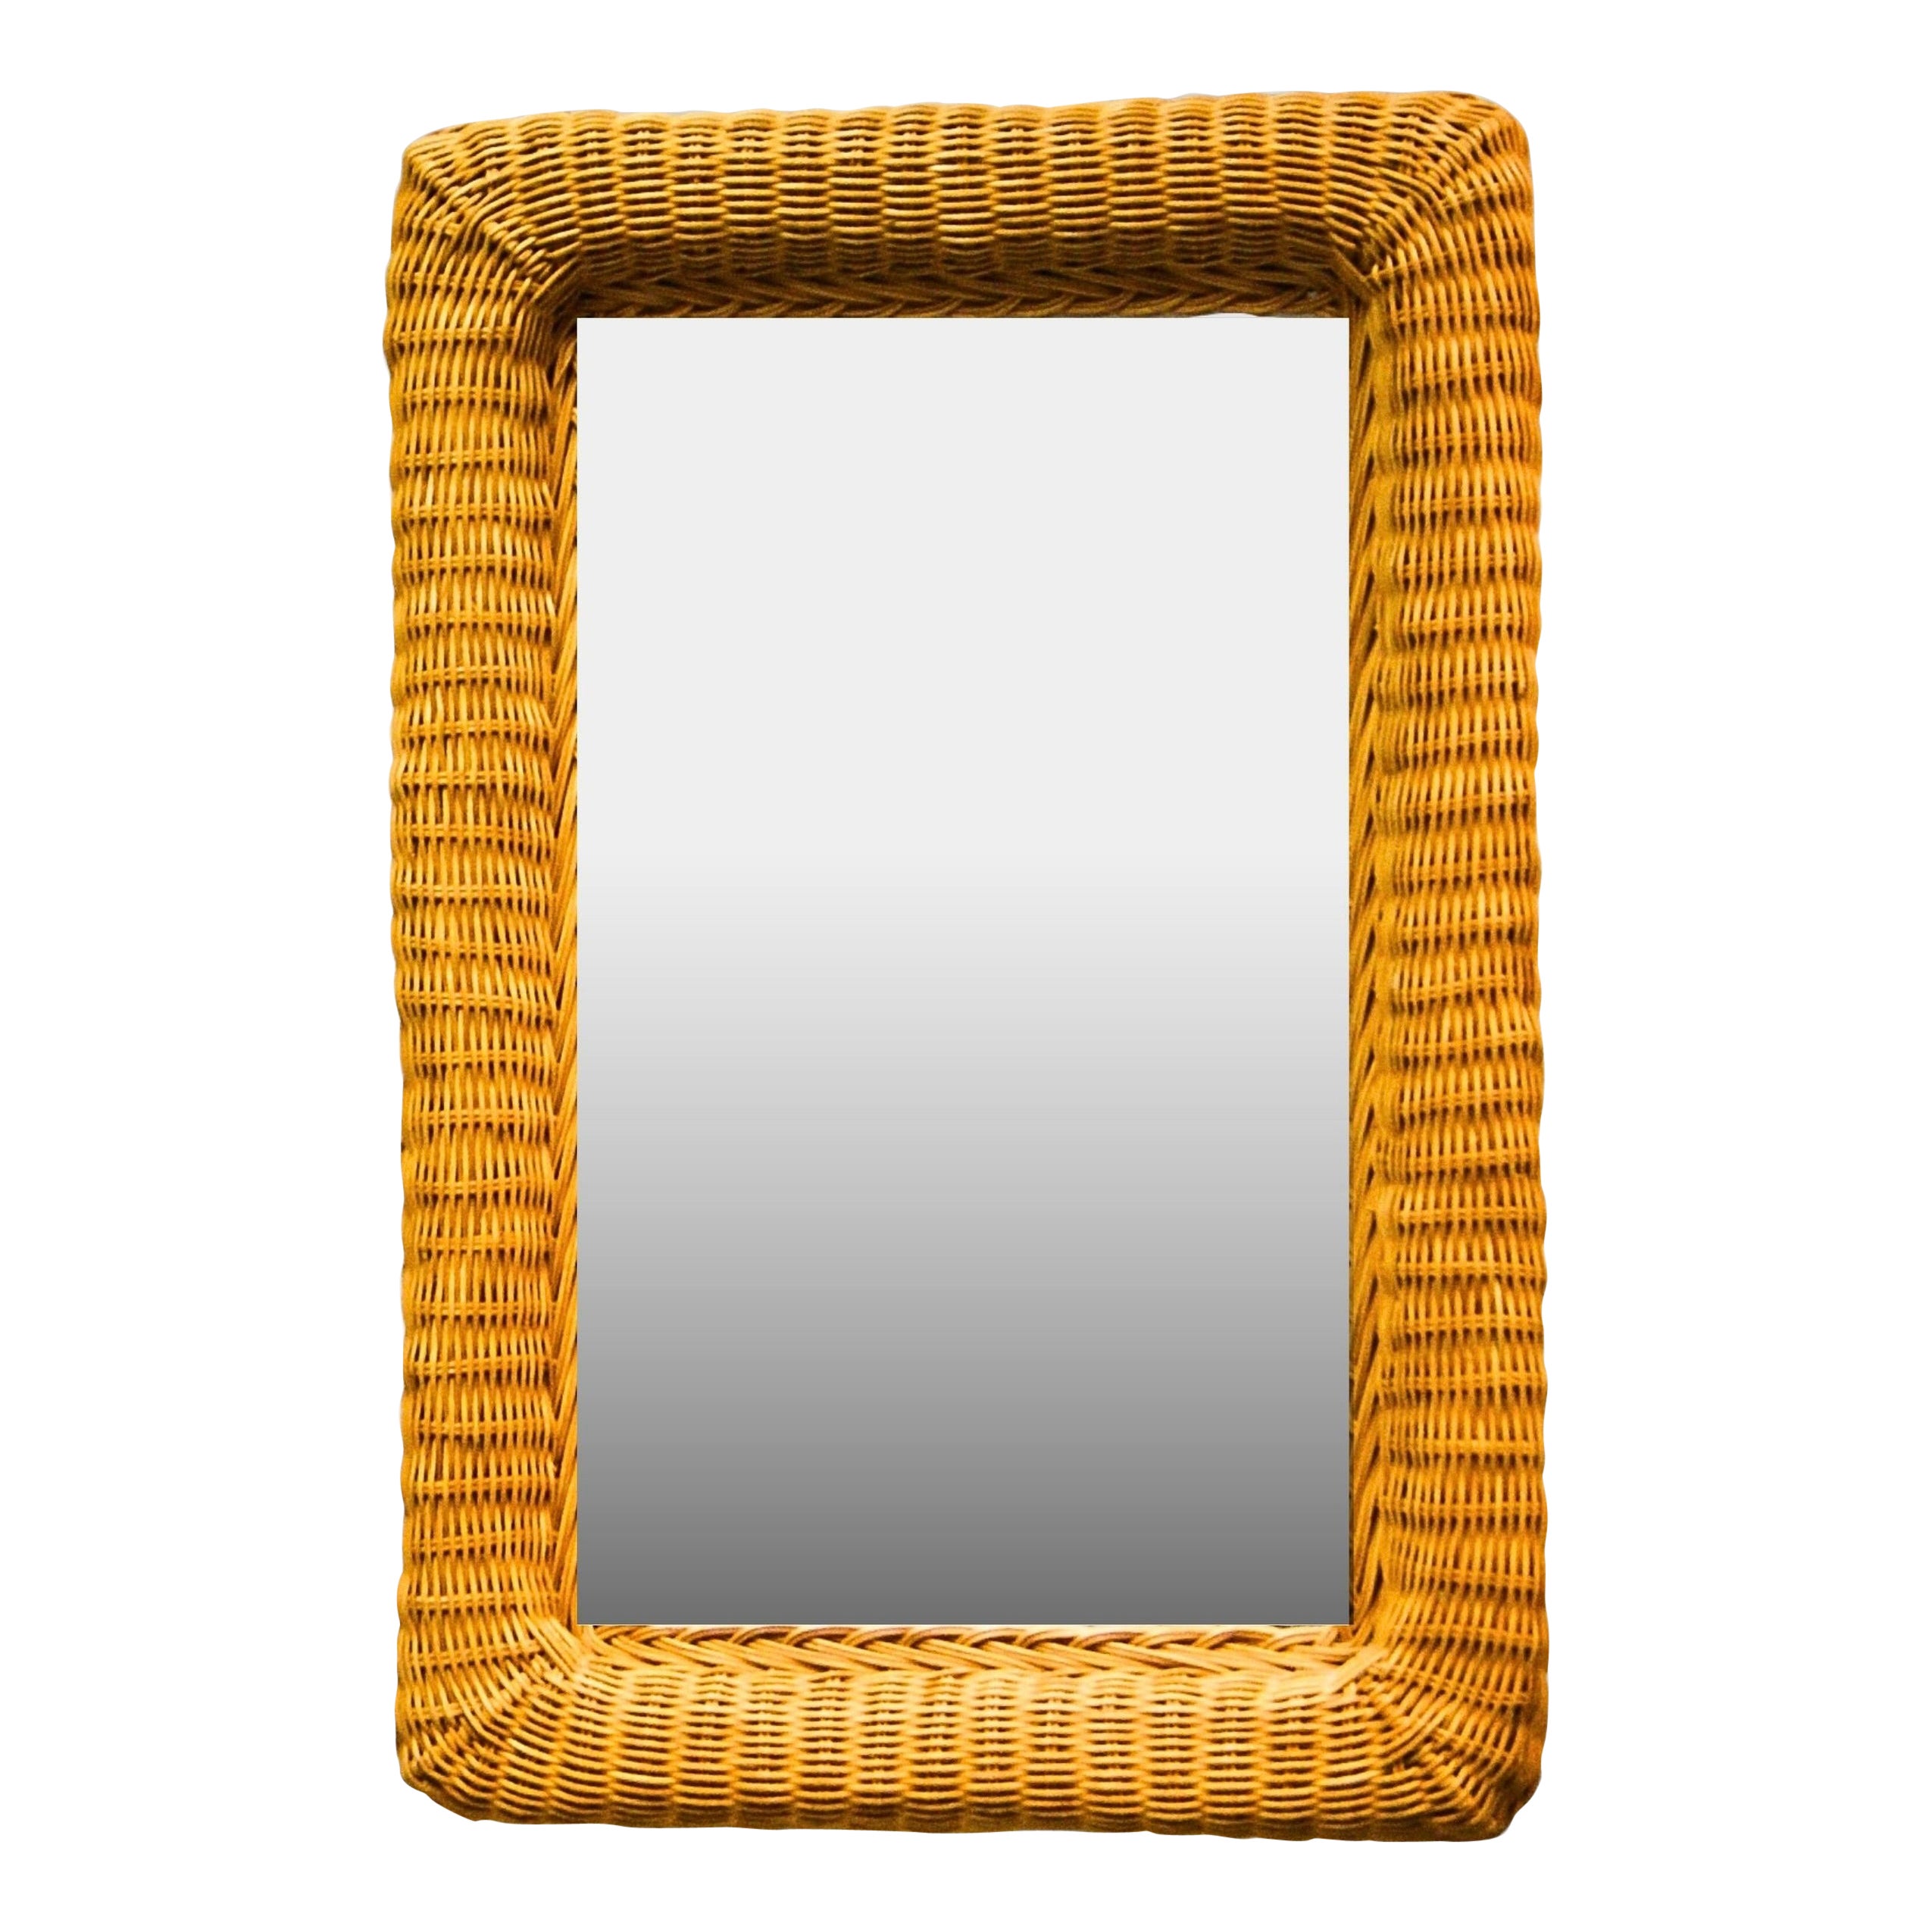 Midcentury Italian Rattan Wall Hanging Mirror Large Sized For Sale